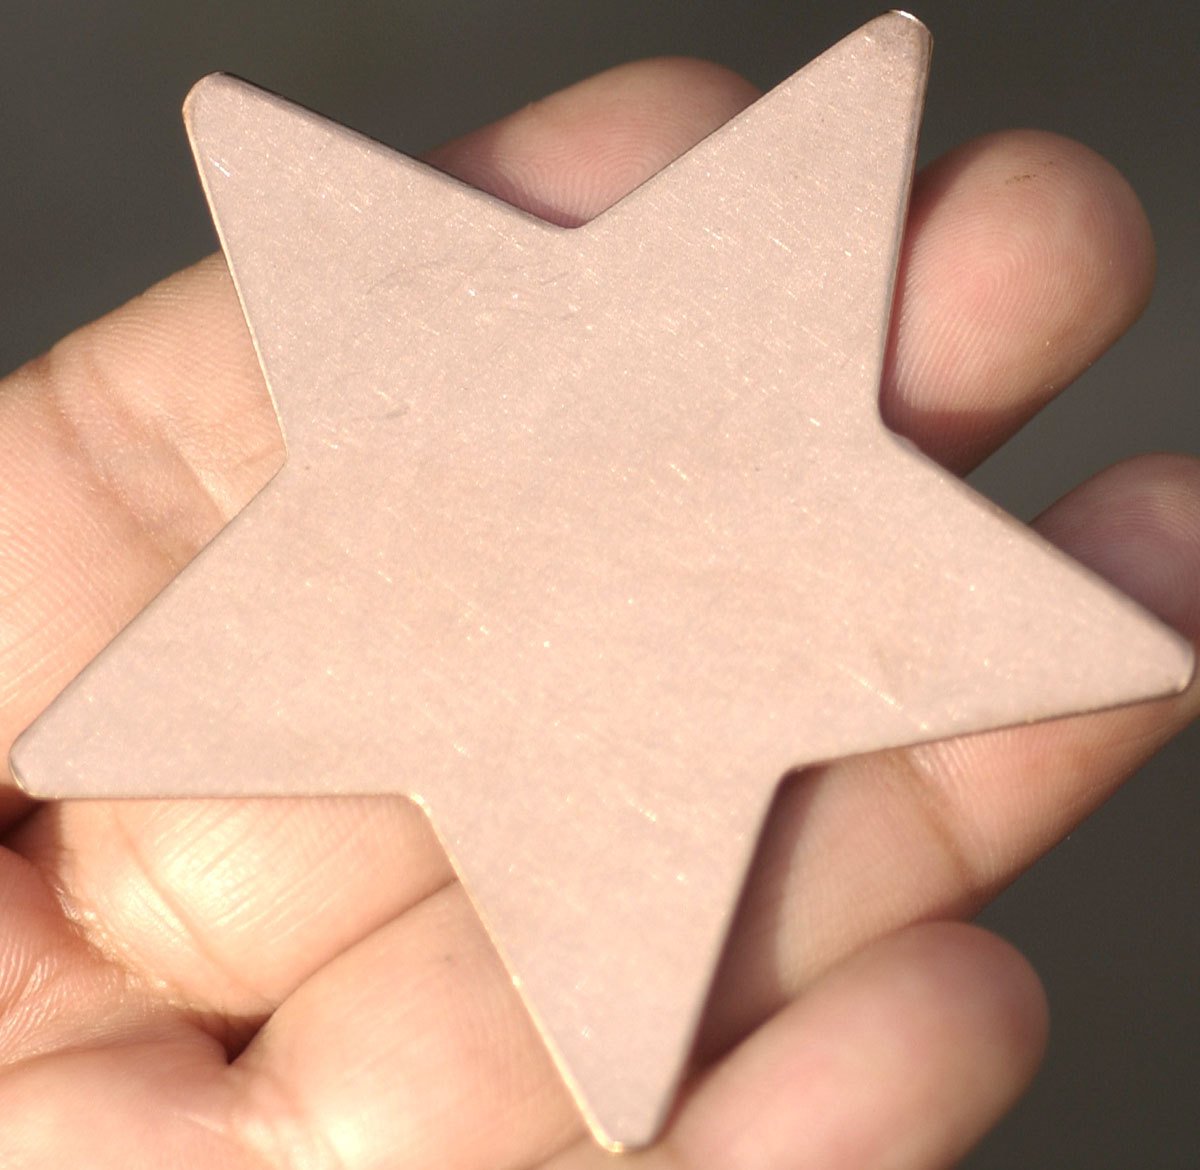 Copper Large Star 20g 62mm Cutout for Enameling Stamping Texturing Soldering Blanks - 2 pieces